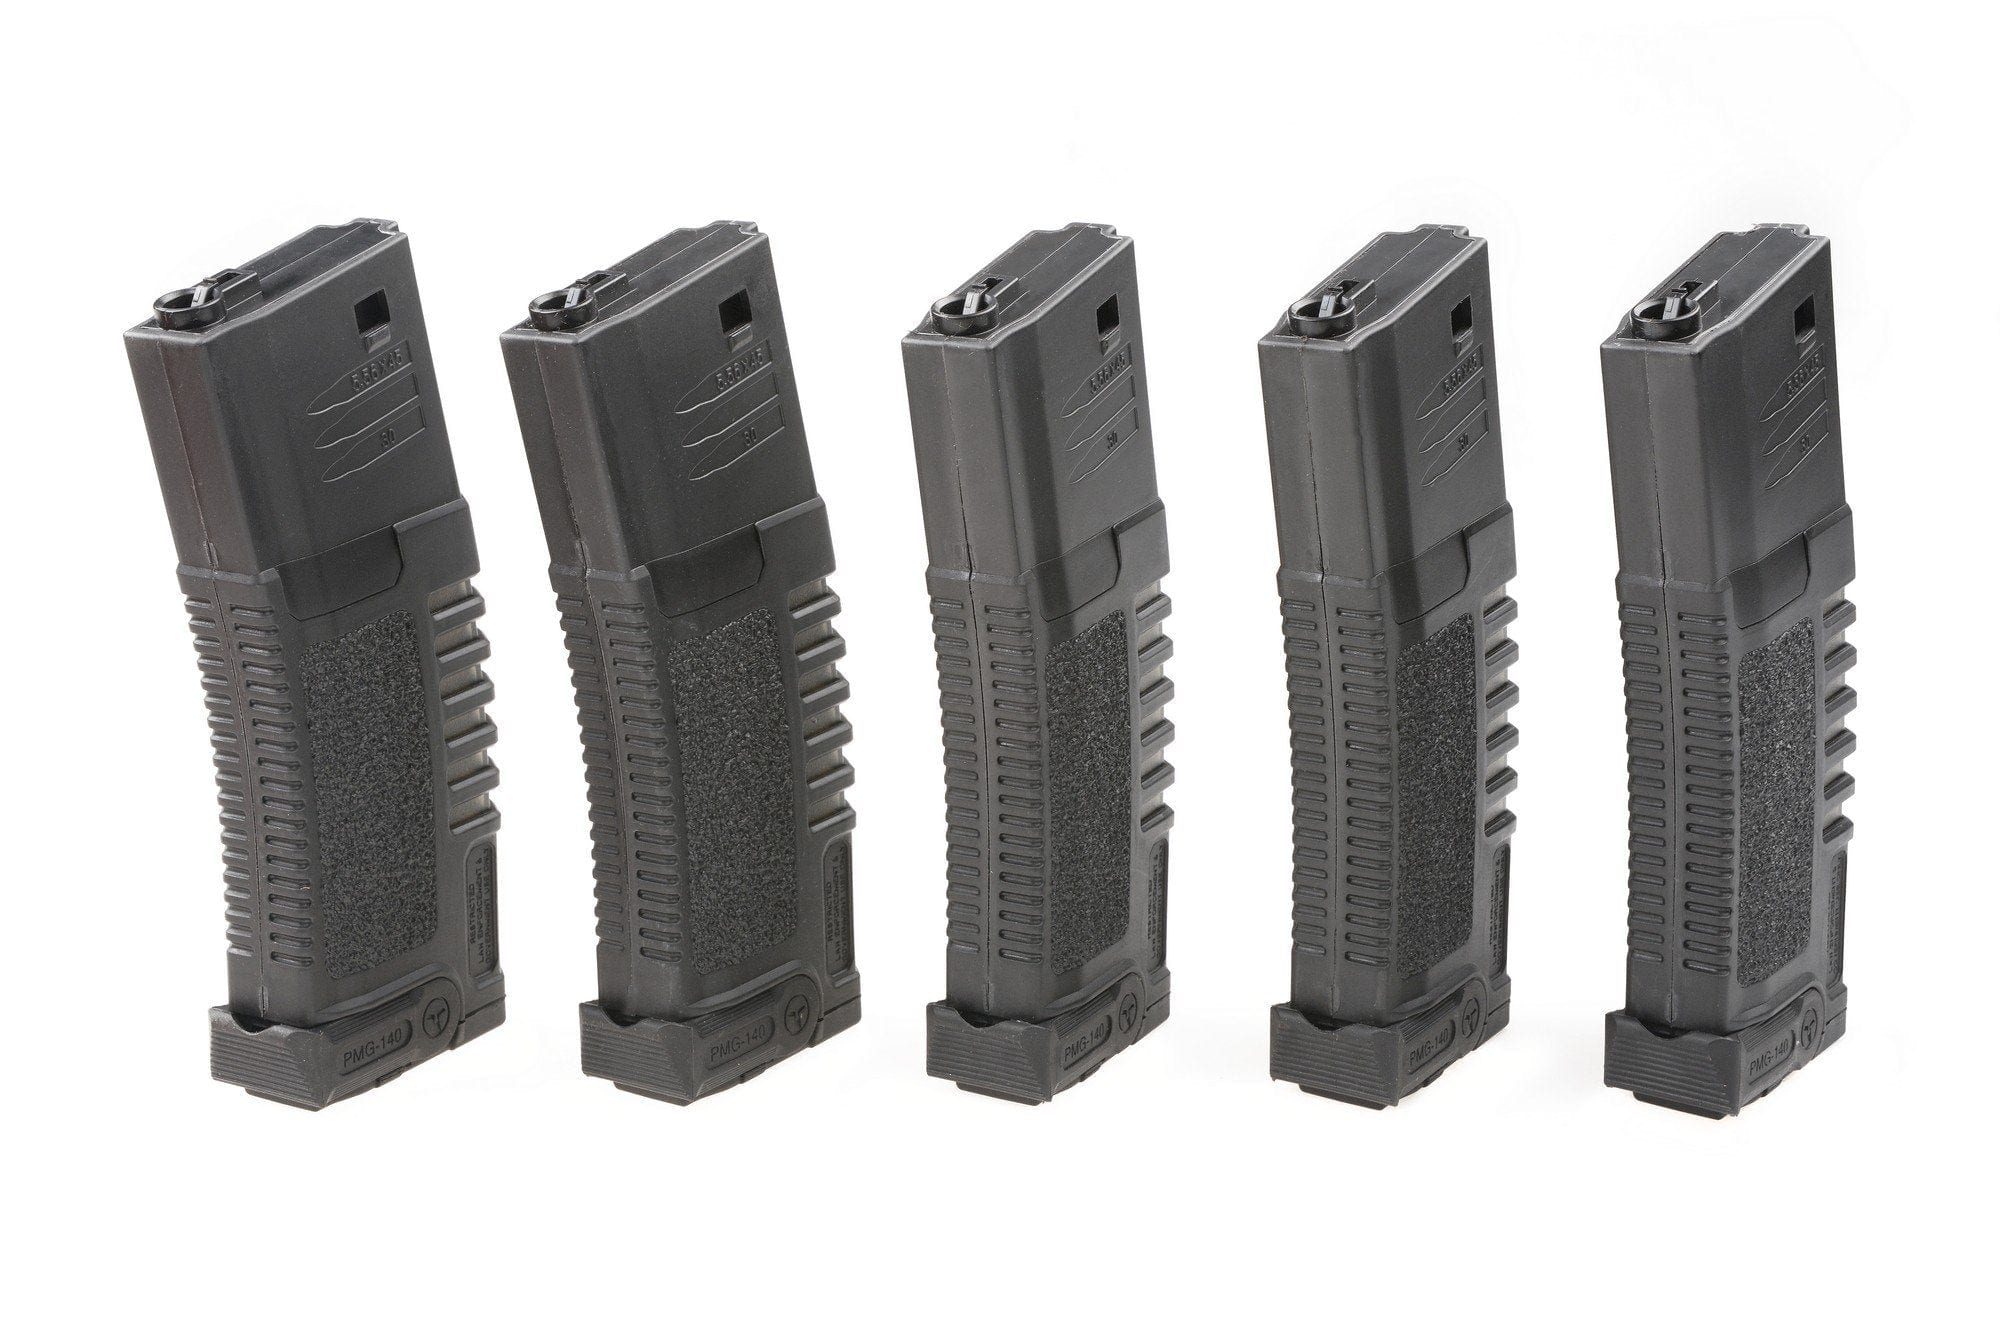 5x set 140rd PMG mid-cap magazine for M4/M16 type replicas - black by AMOEBA on Airsoft Mania Europe